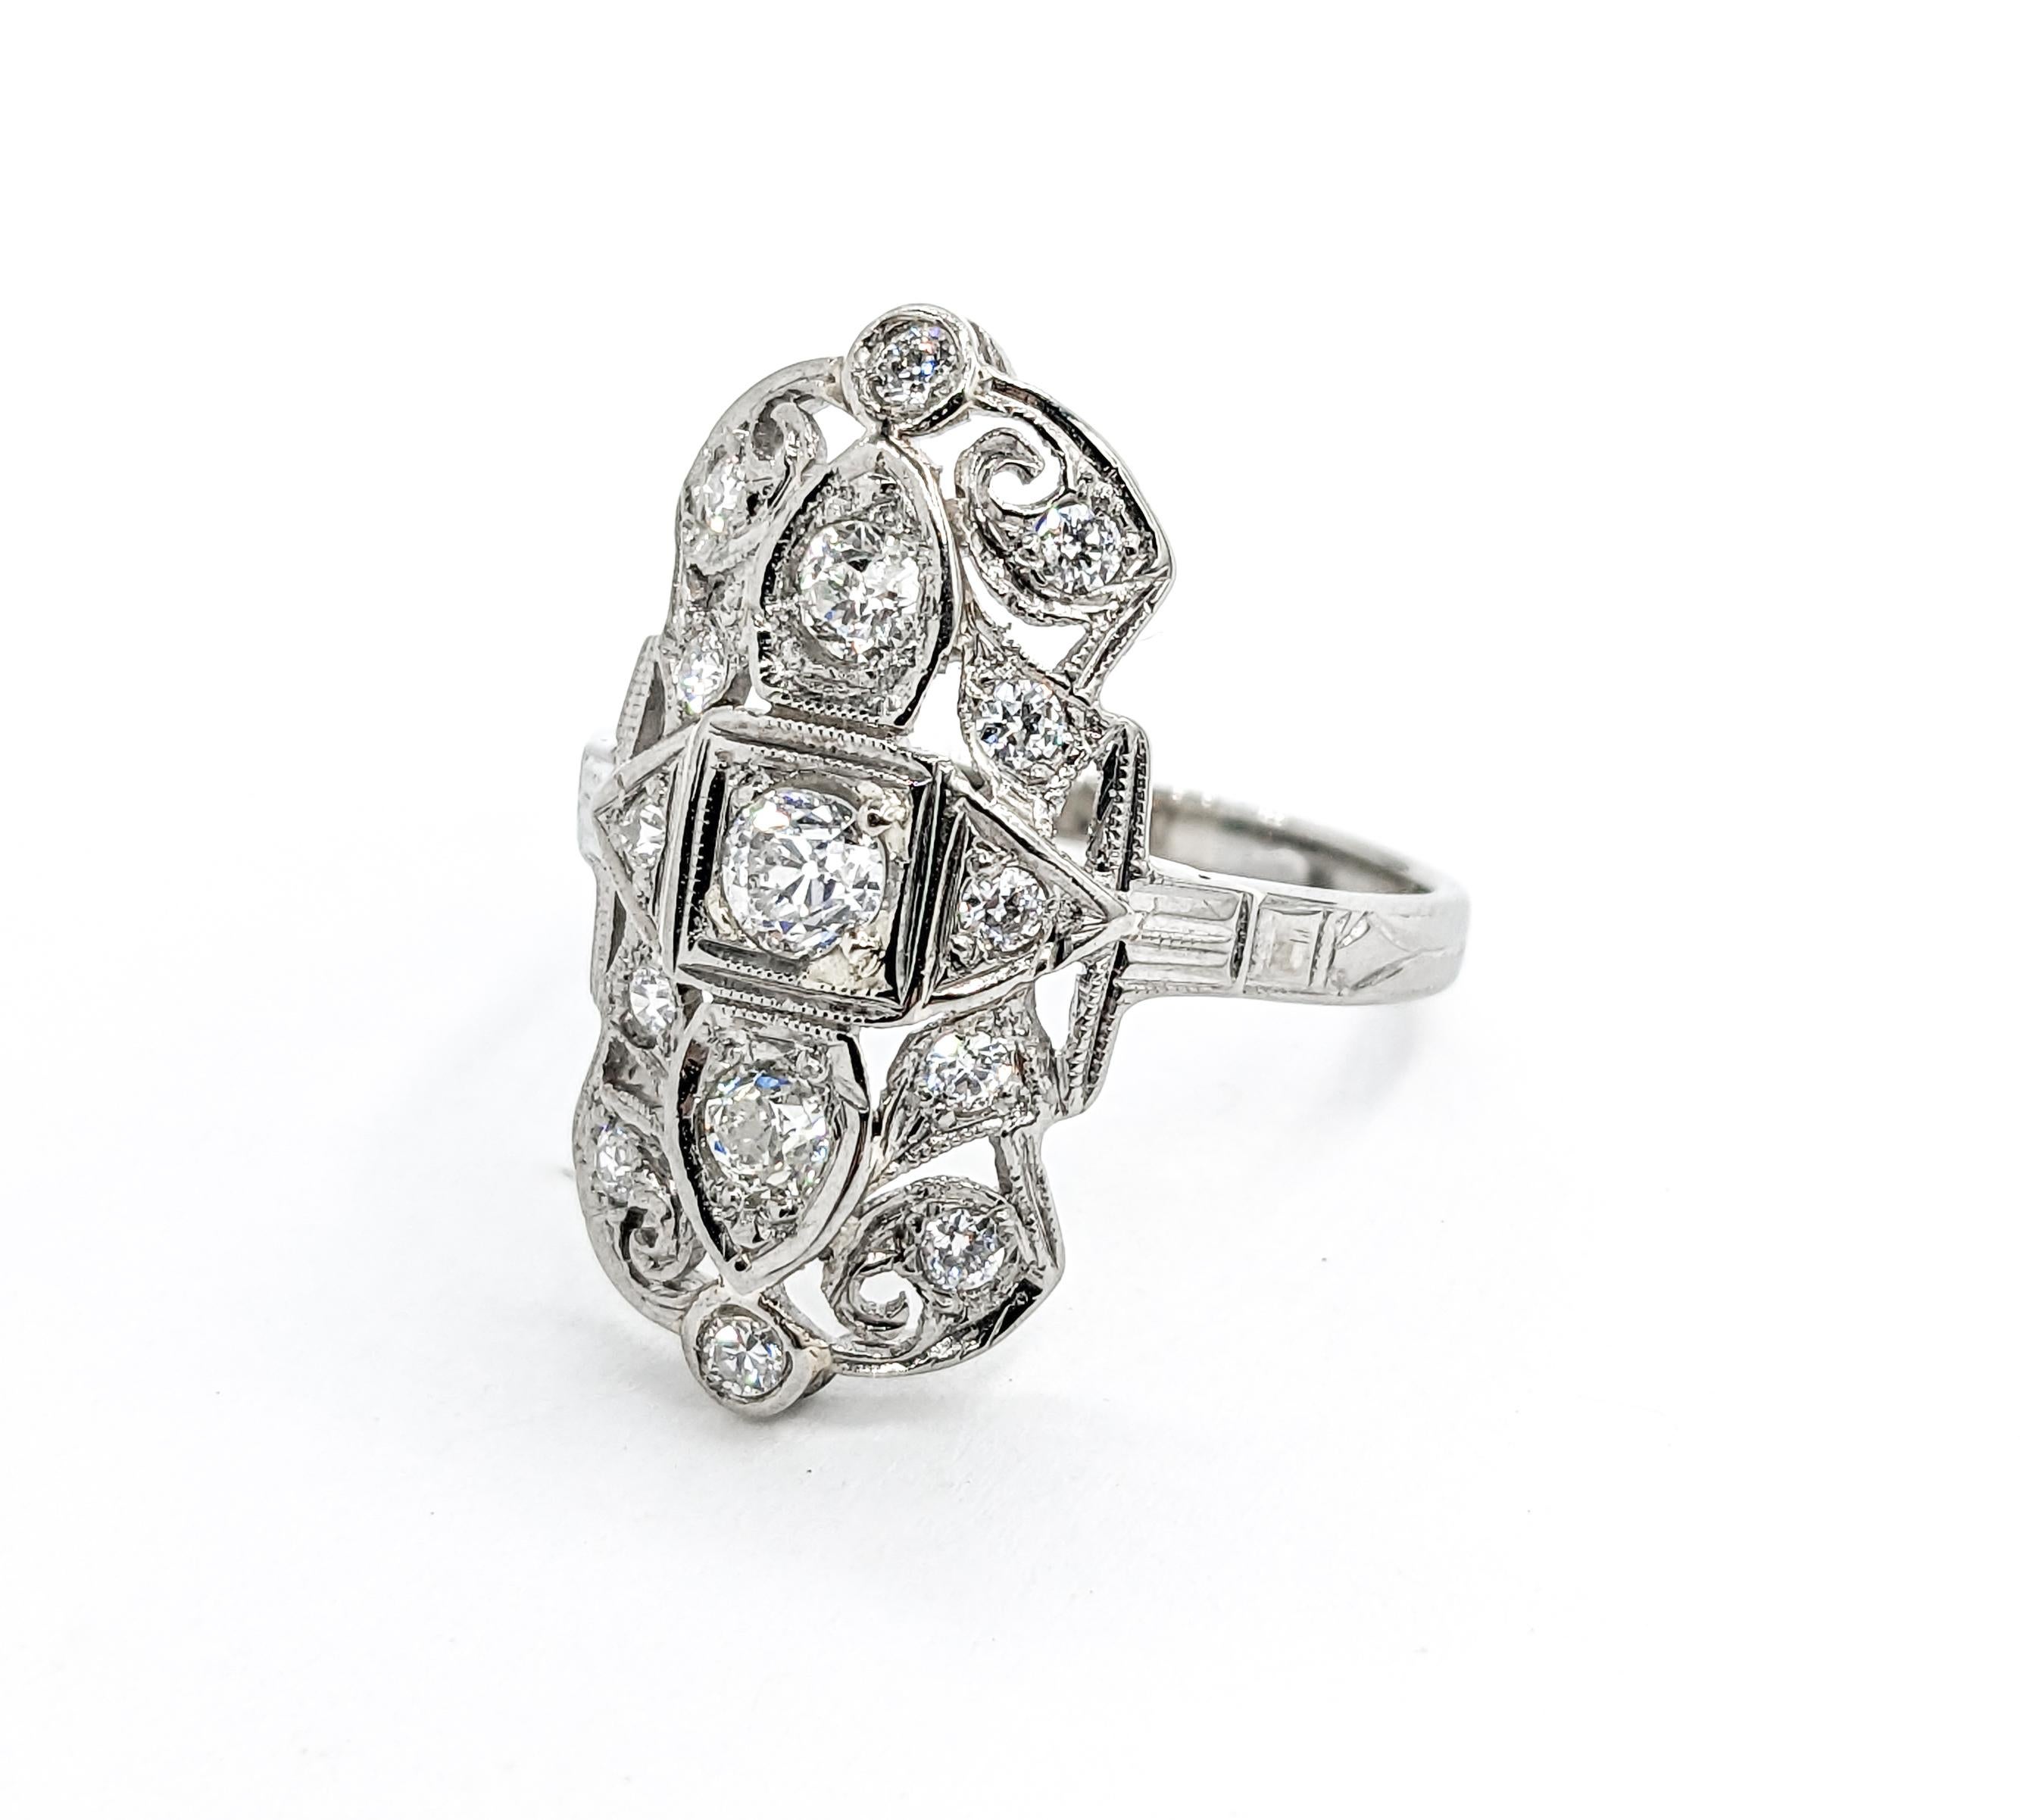 Antique .96ctw Diamond Shield Ring In White Gold

Discover the enchantment of Art Deco elegance with this stunning Antique Diamond Ring. Meticulously crafted in 18k white gold, this piece features a beautiful Milgrain detail design. At the heart of